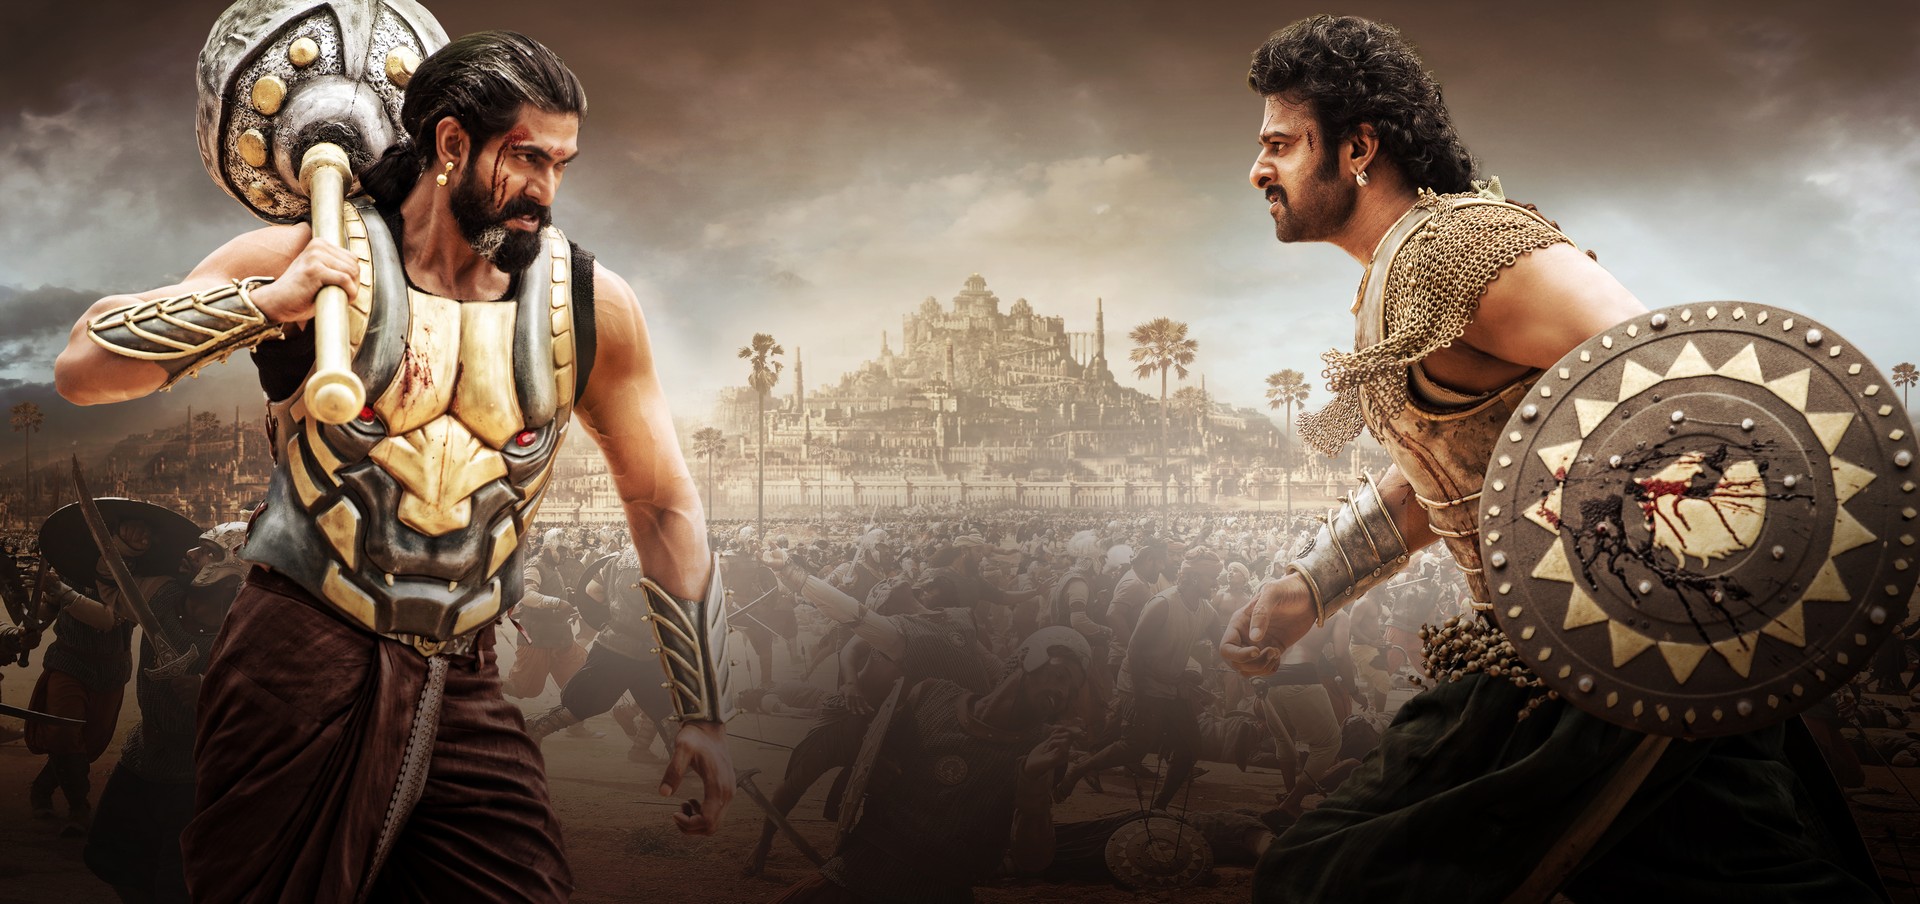 Image result for baahubali